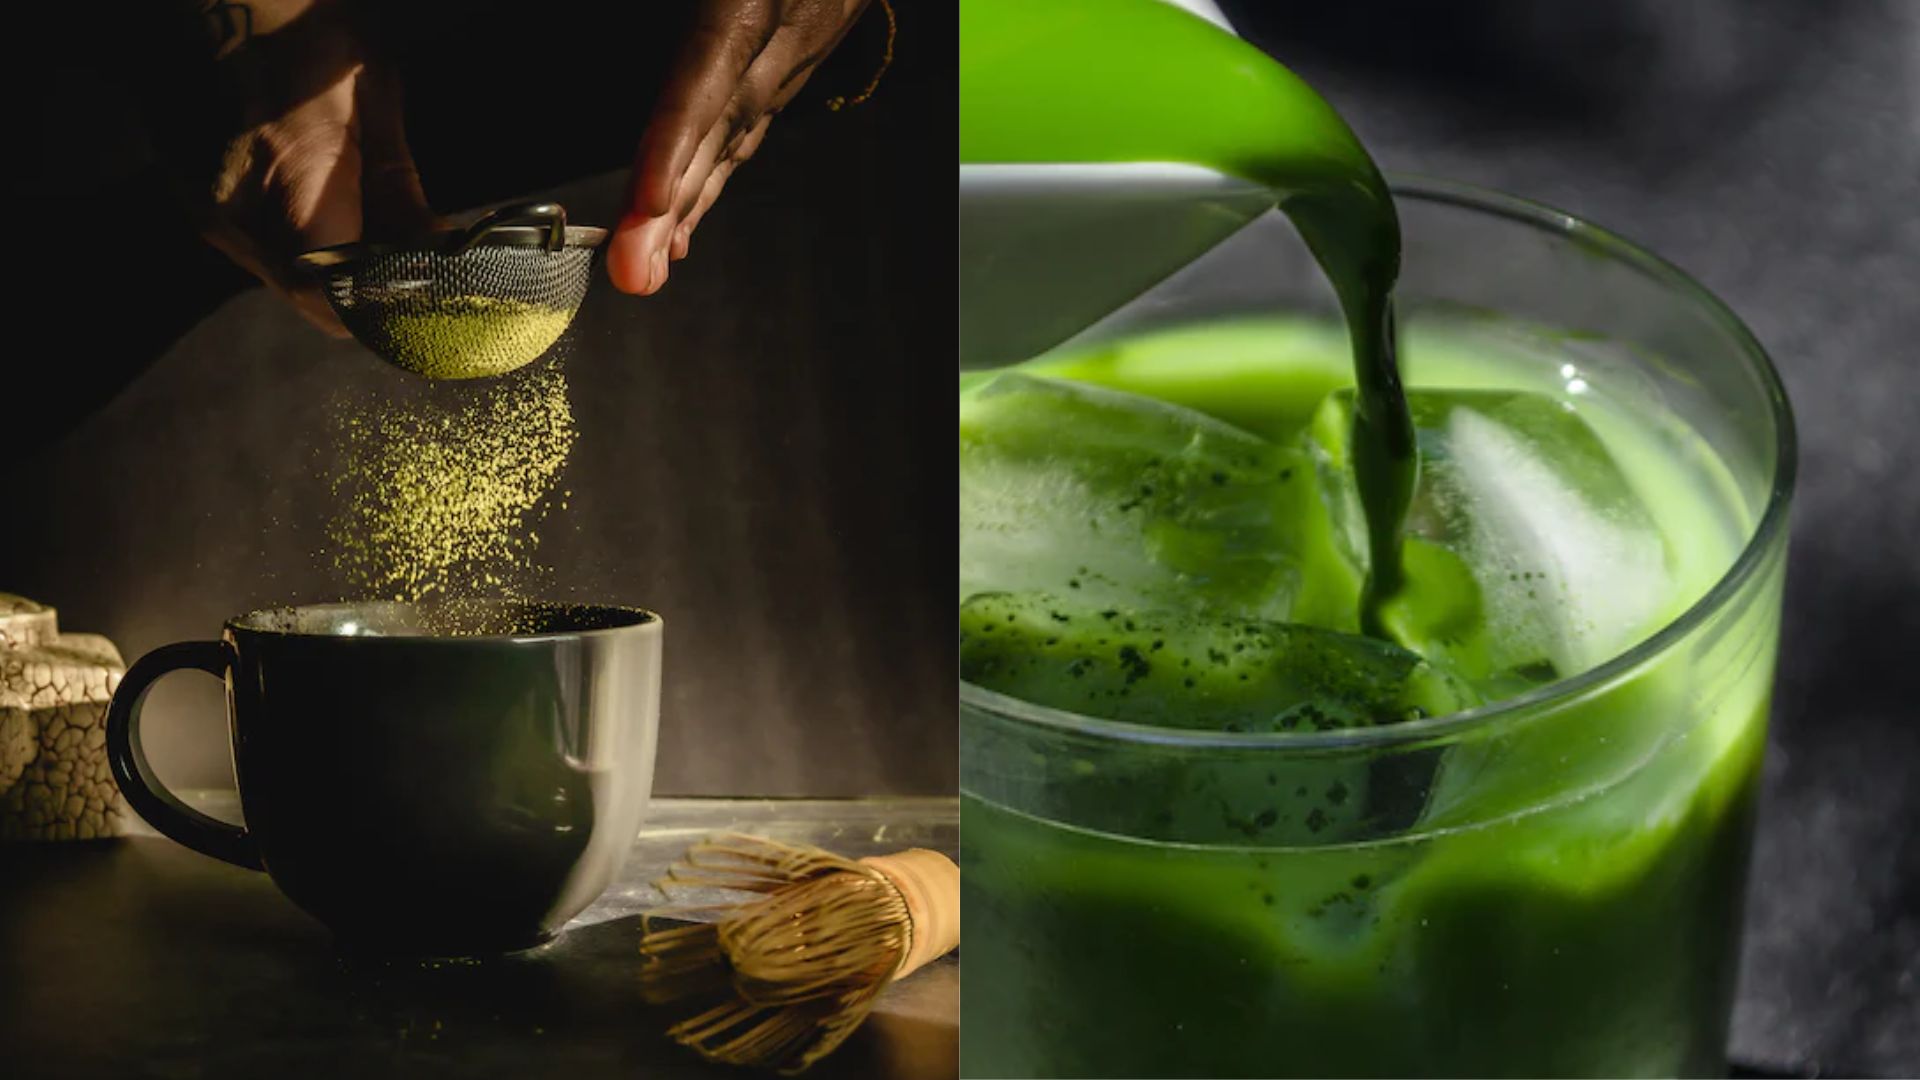 Find out the benefits of consuming matcha!